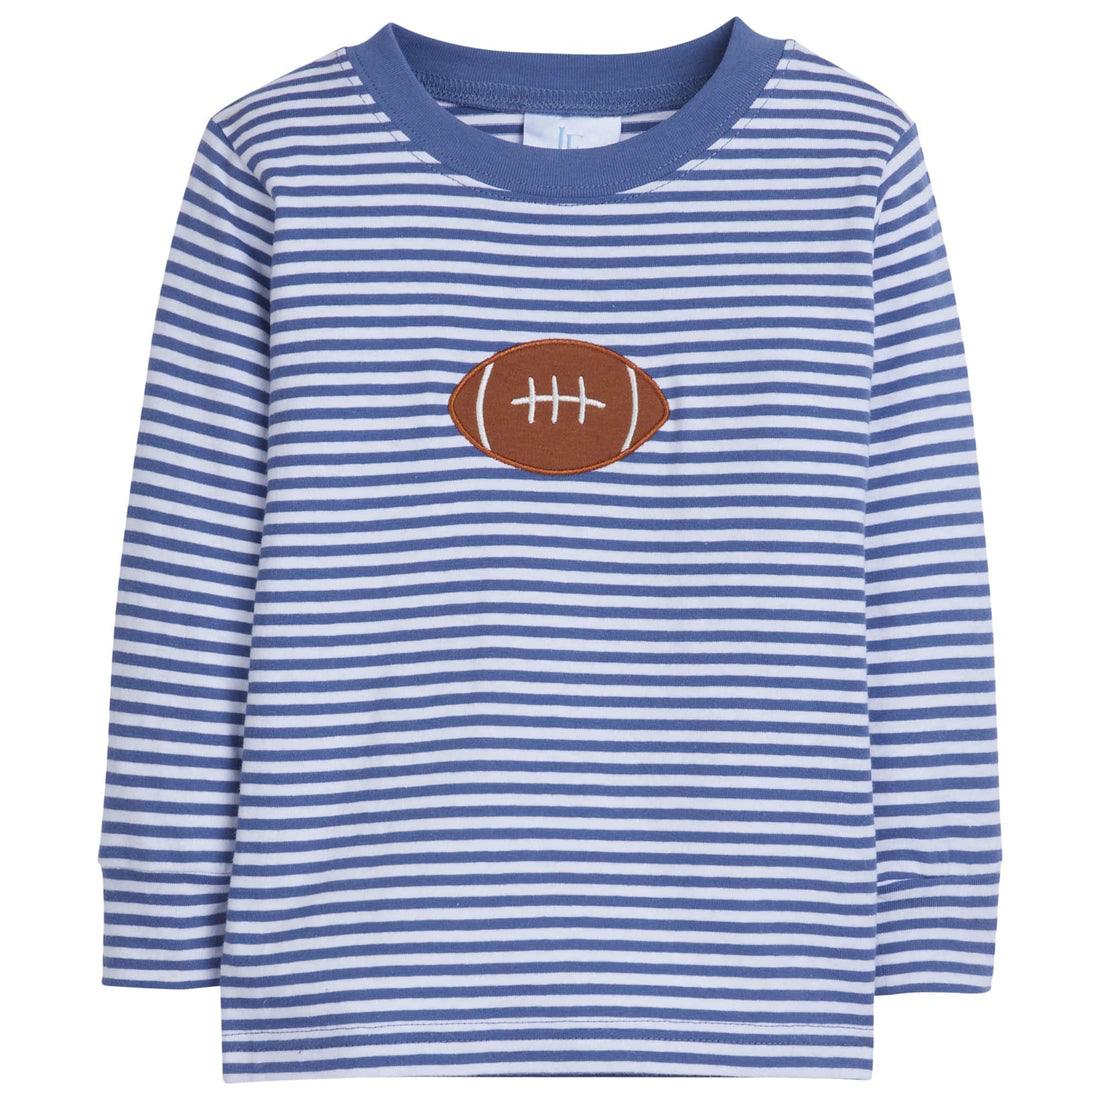 little english classic childrens clothing boys long sleeve royal blue striped t-shirt with football applique